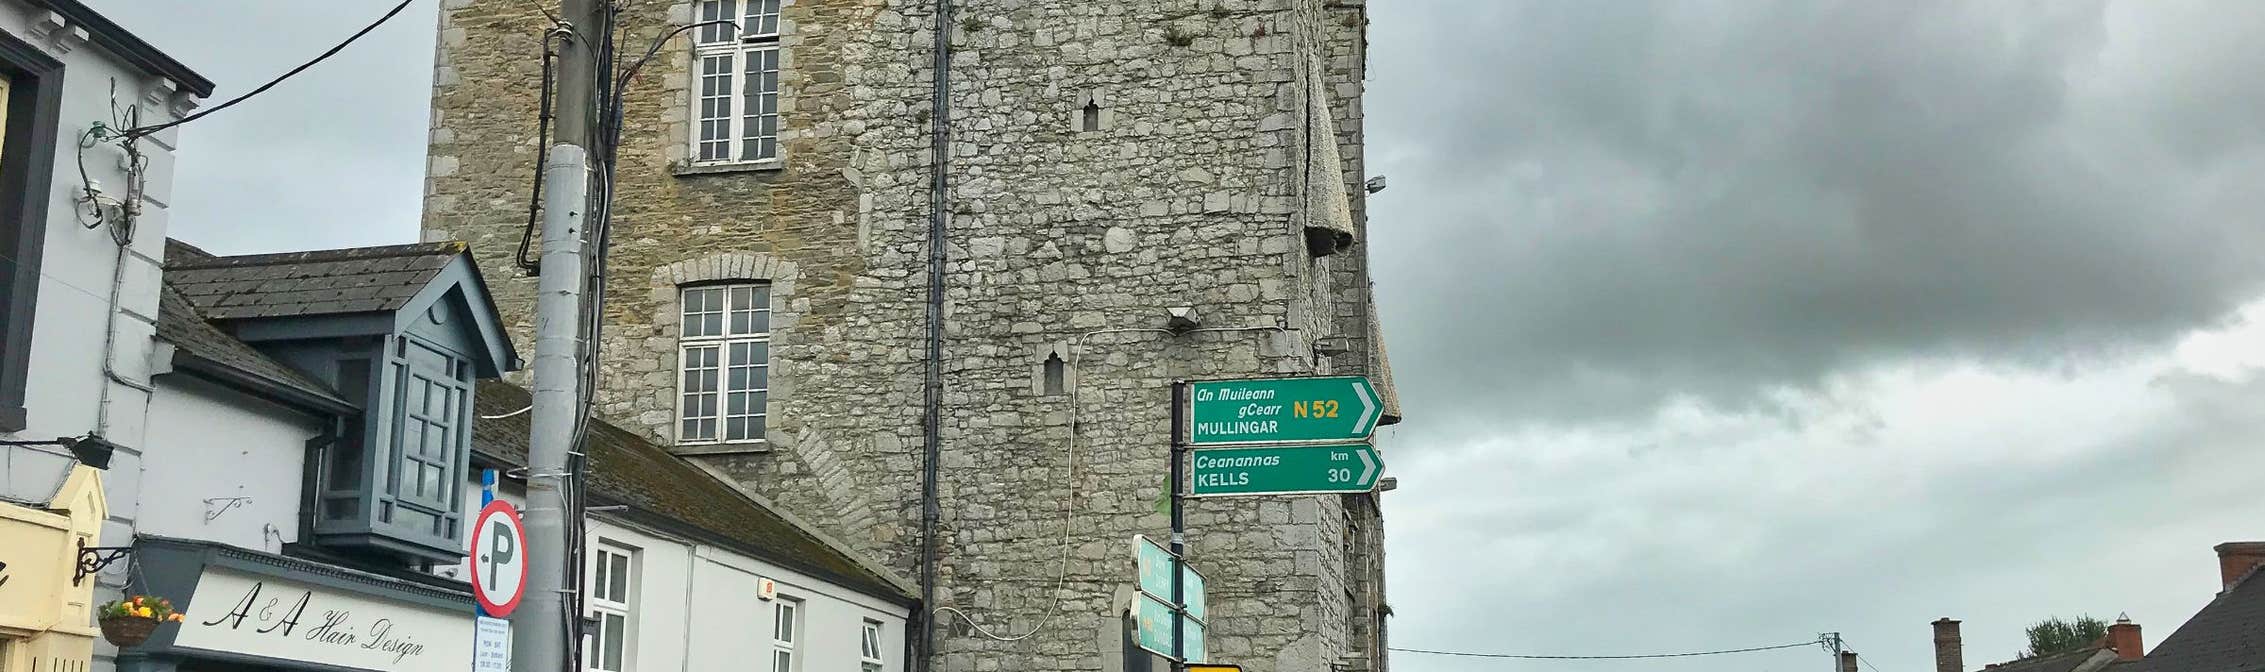 Image of Ardee town in County Louth